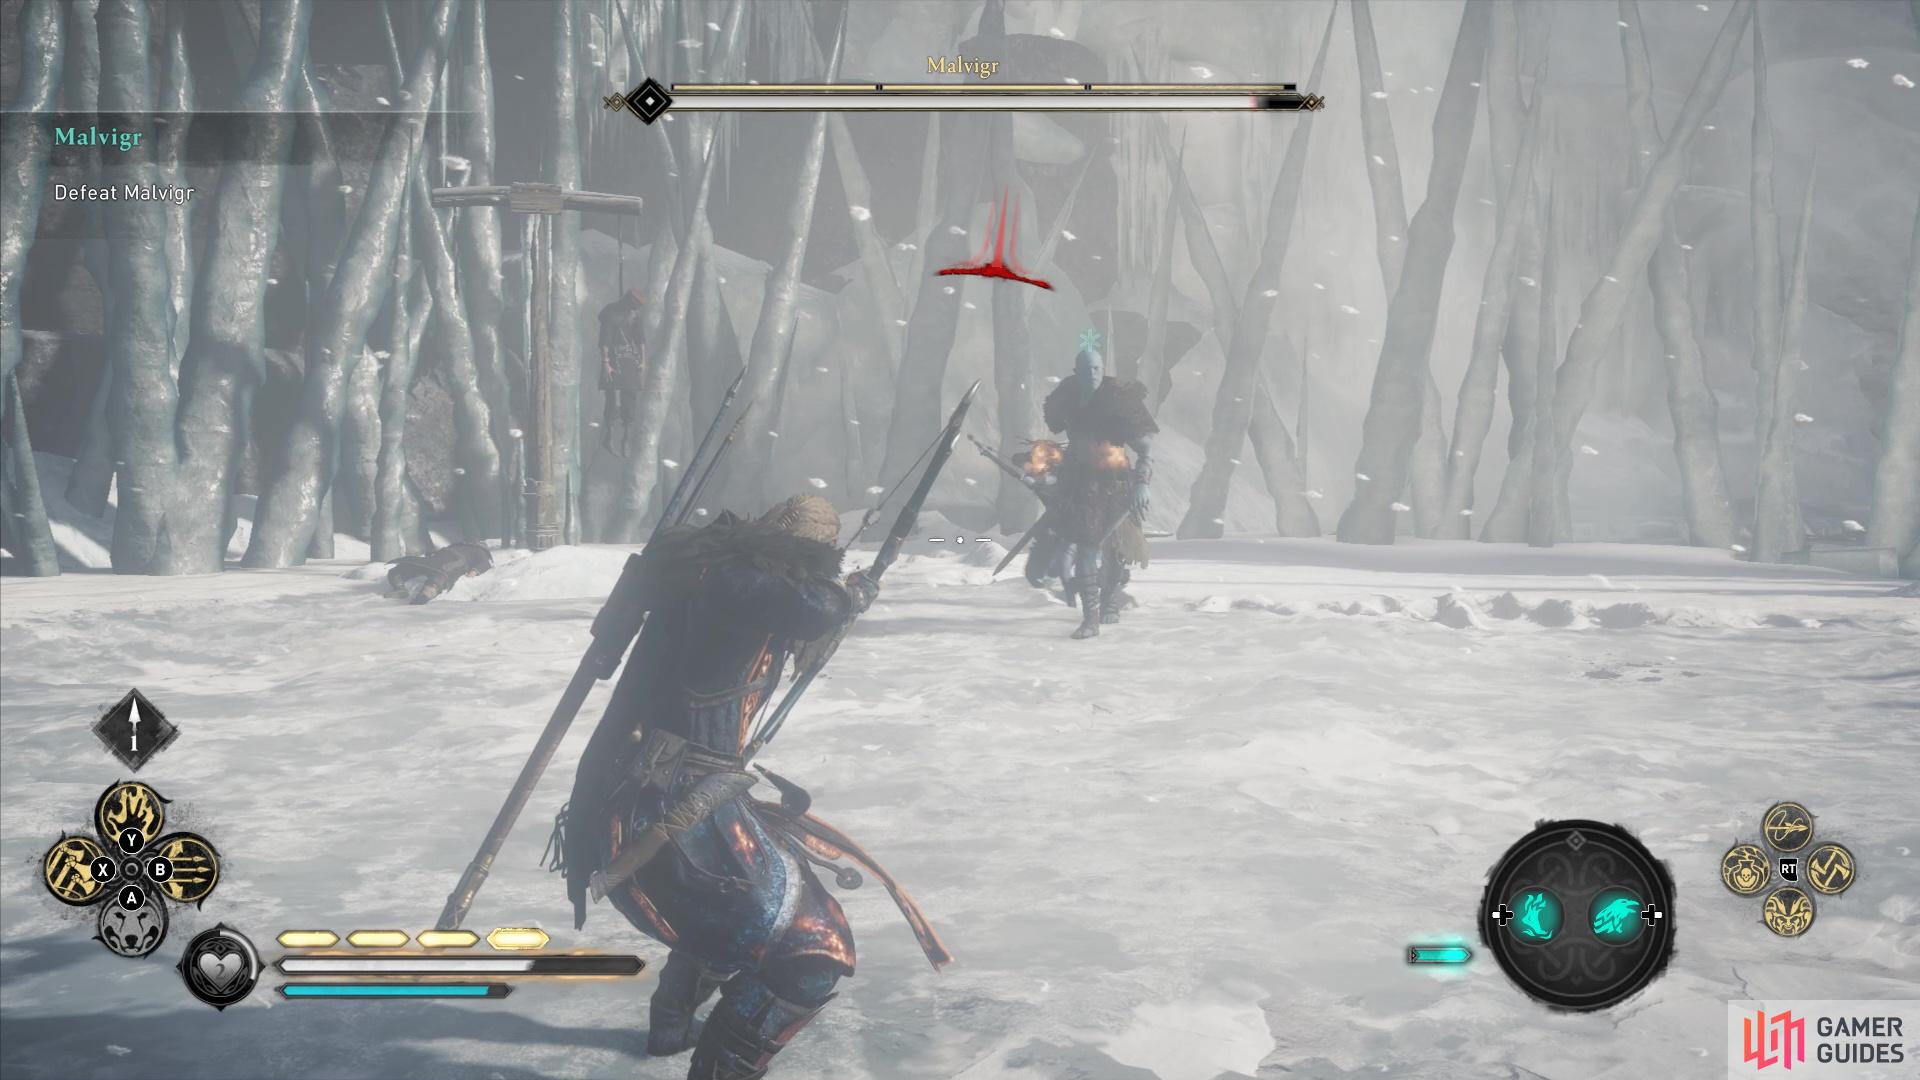 Youll first need to clear out the elite enemies before you can fight Malvigr